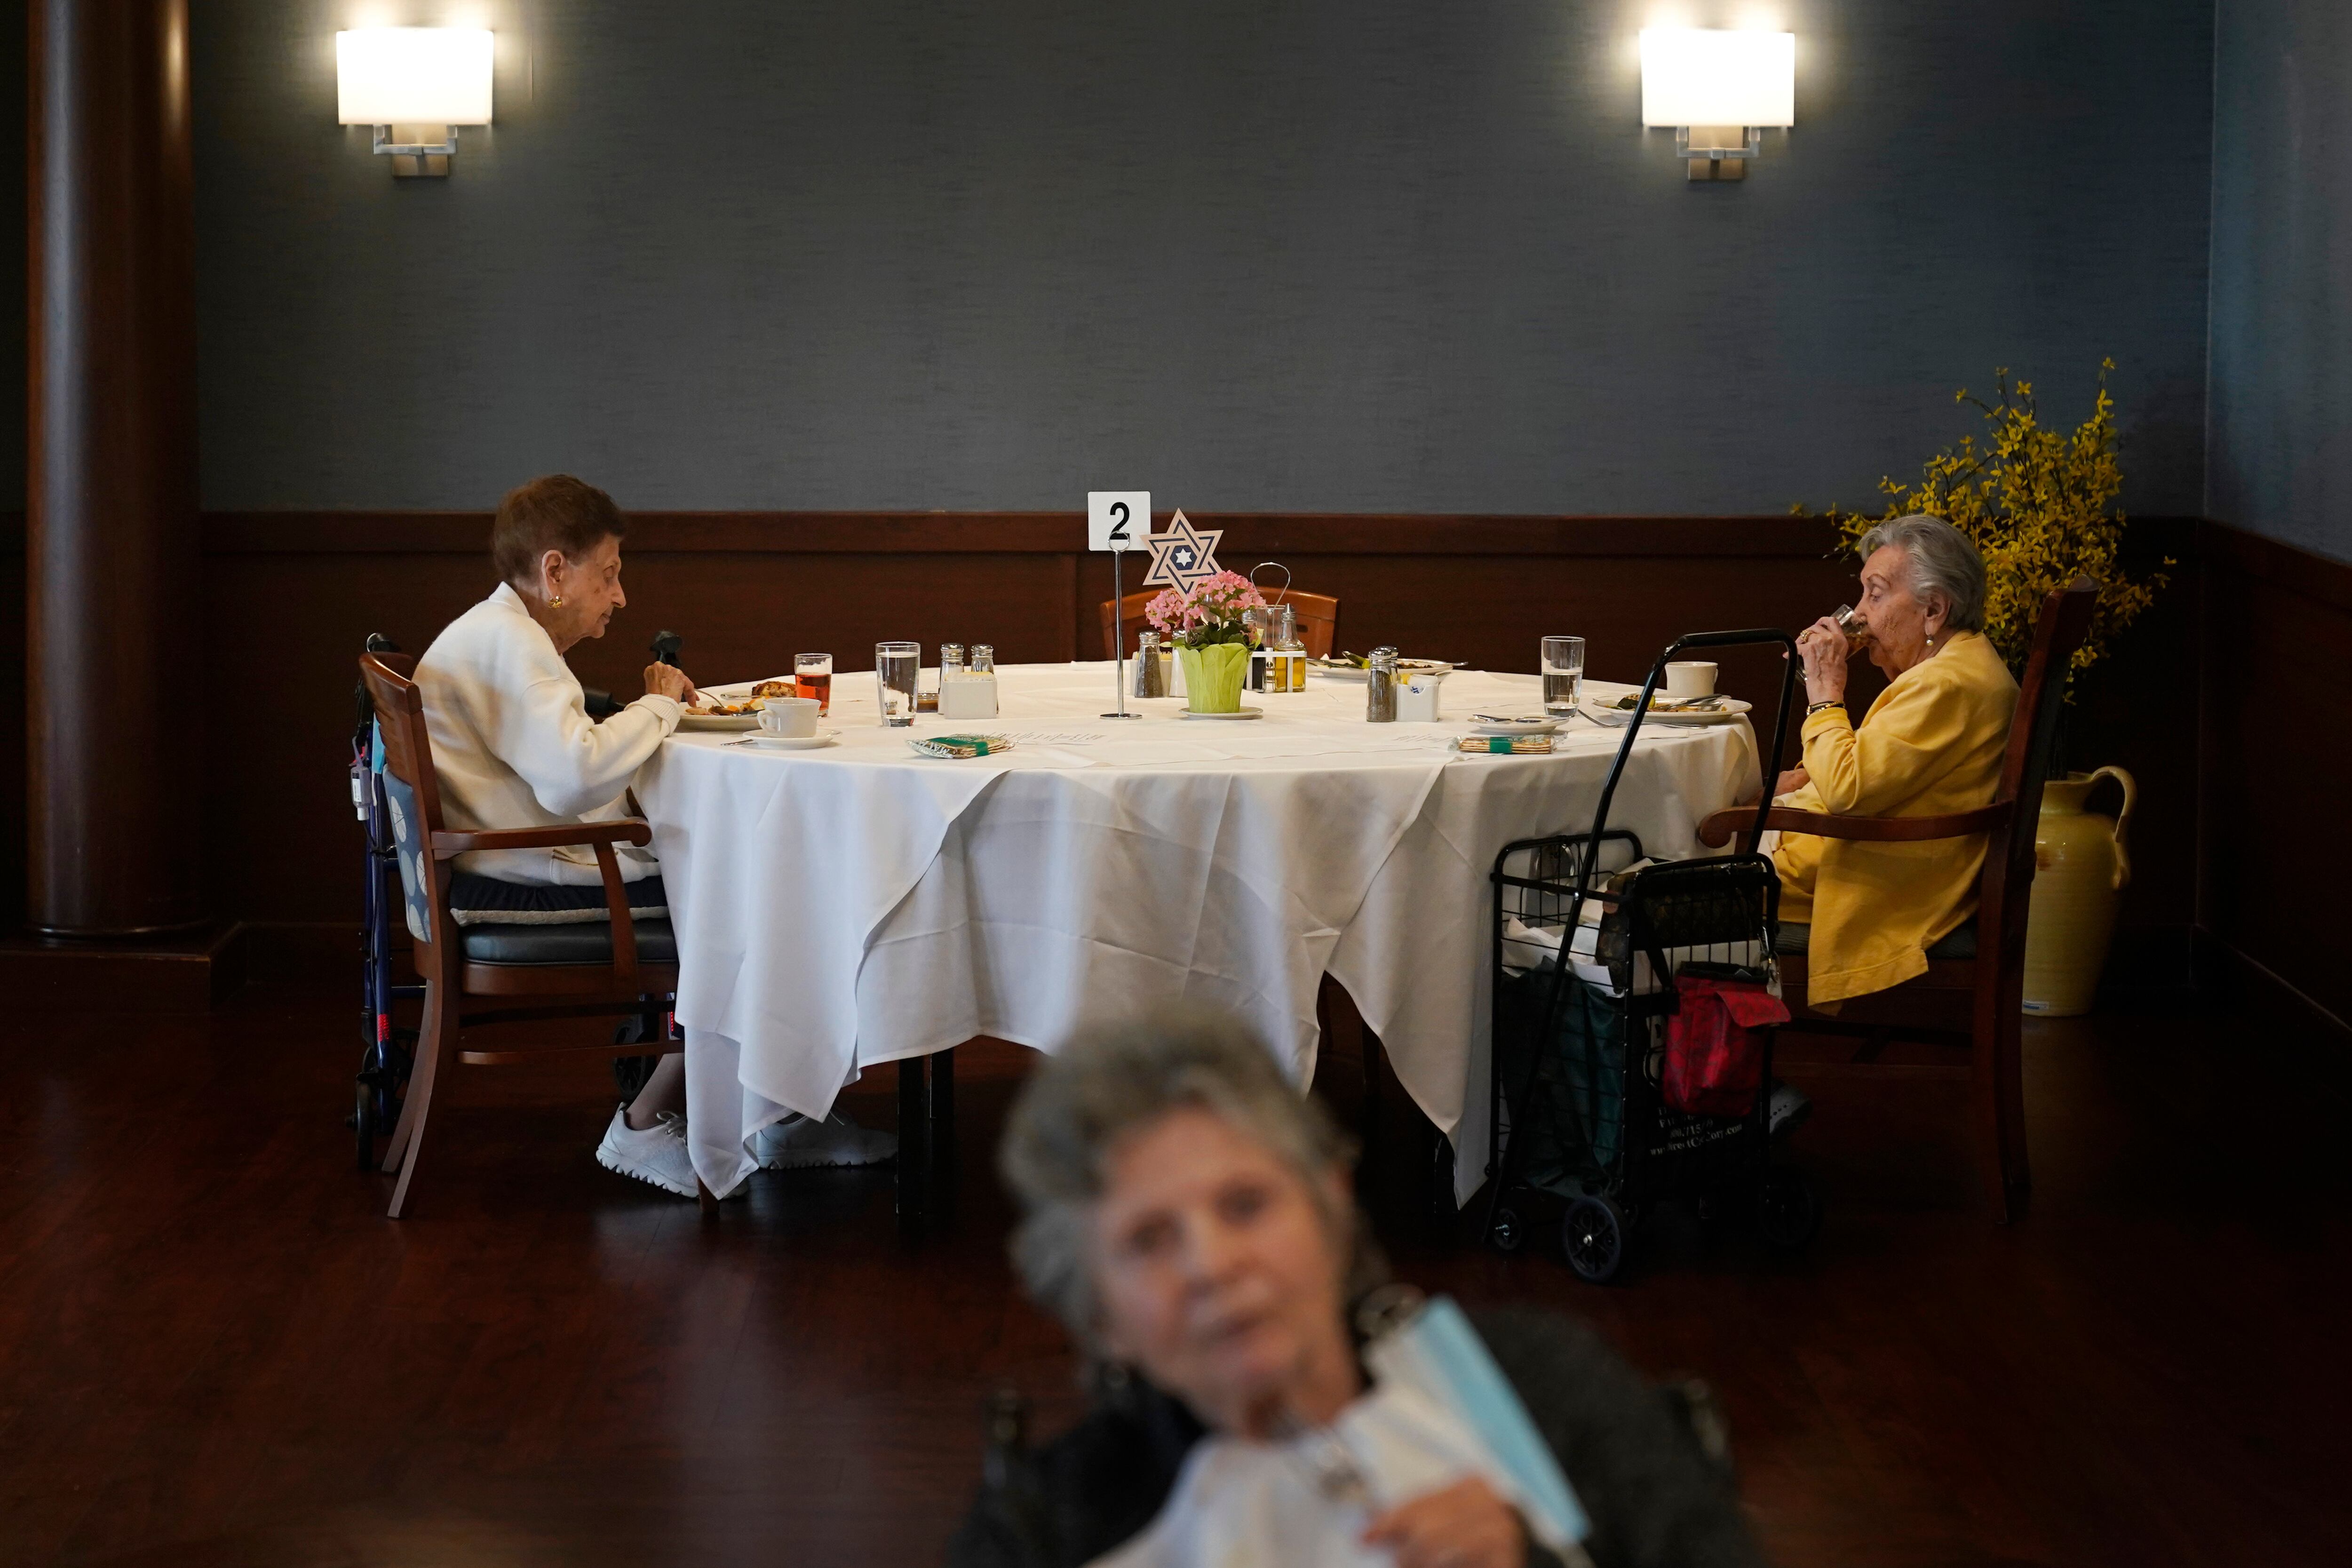 Women in an aged care home, in April 2020 in New York.